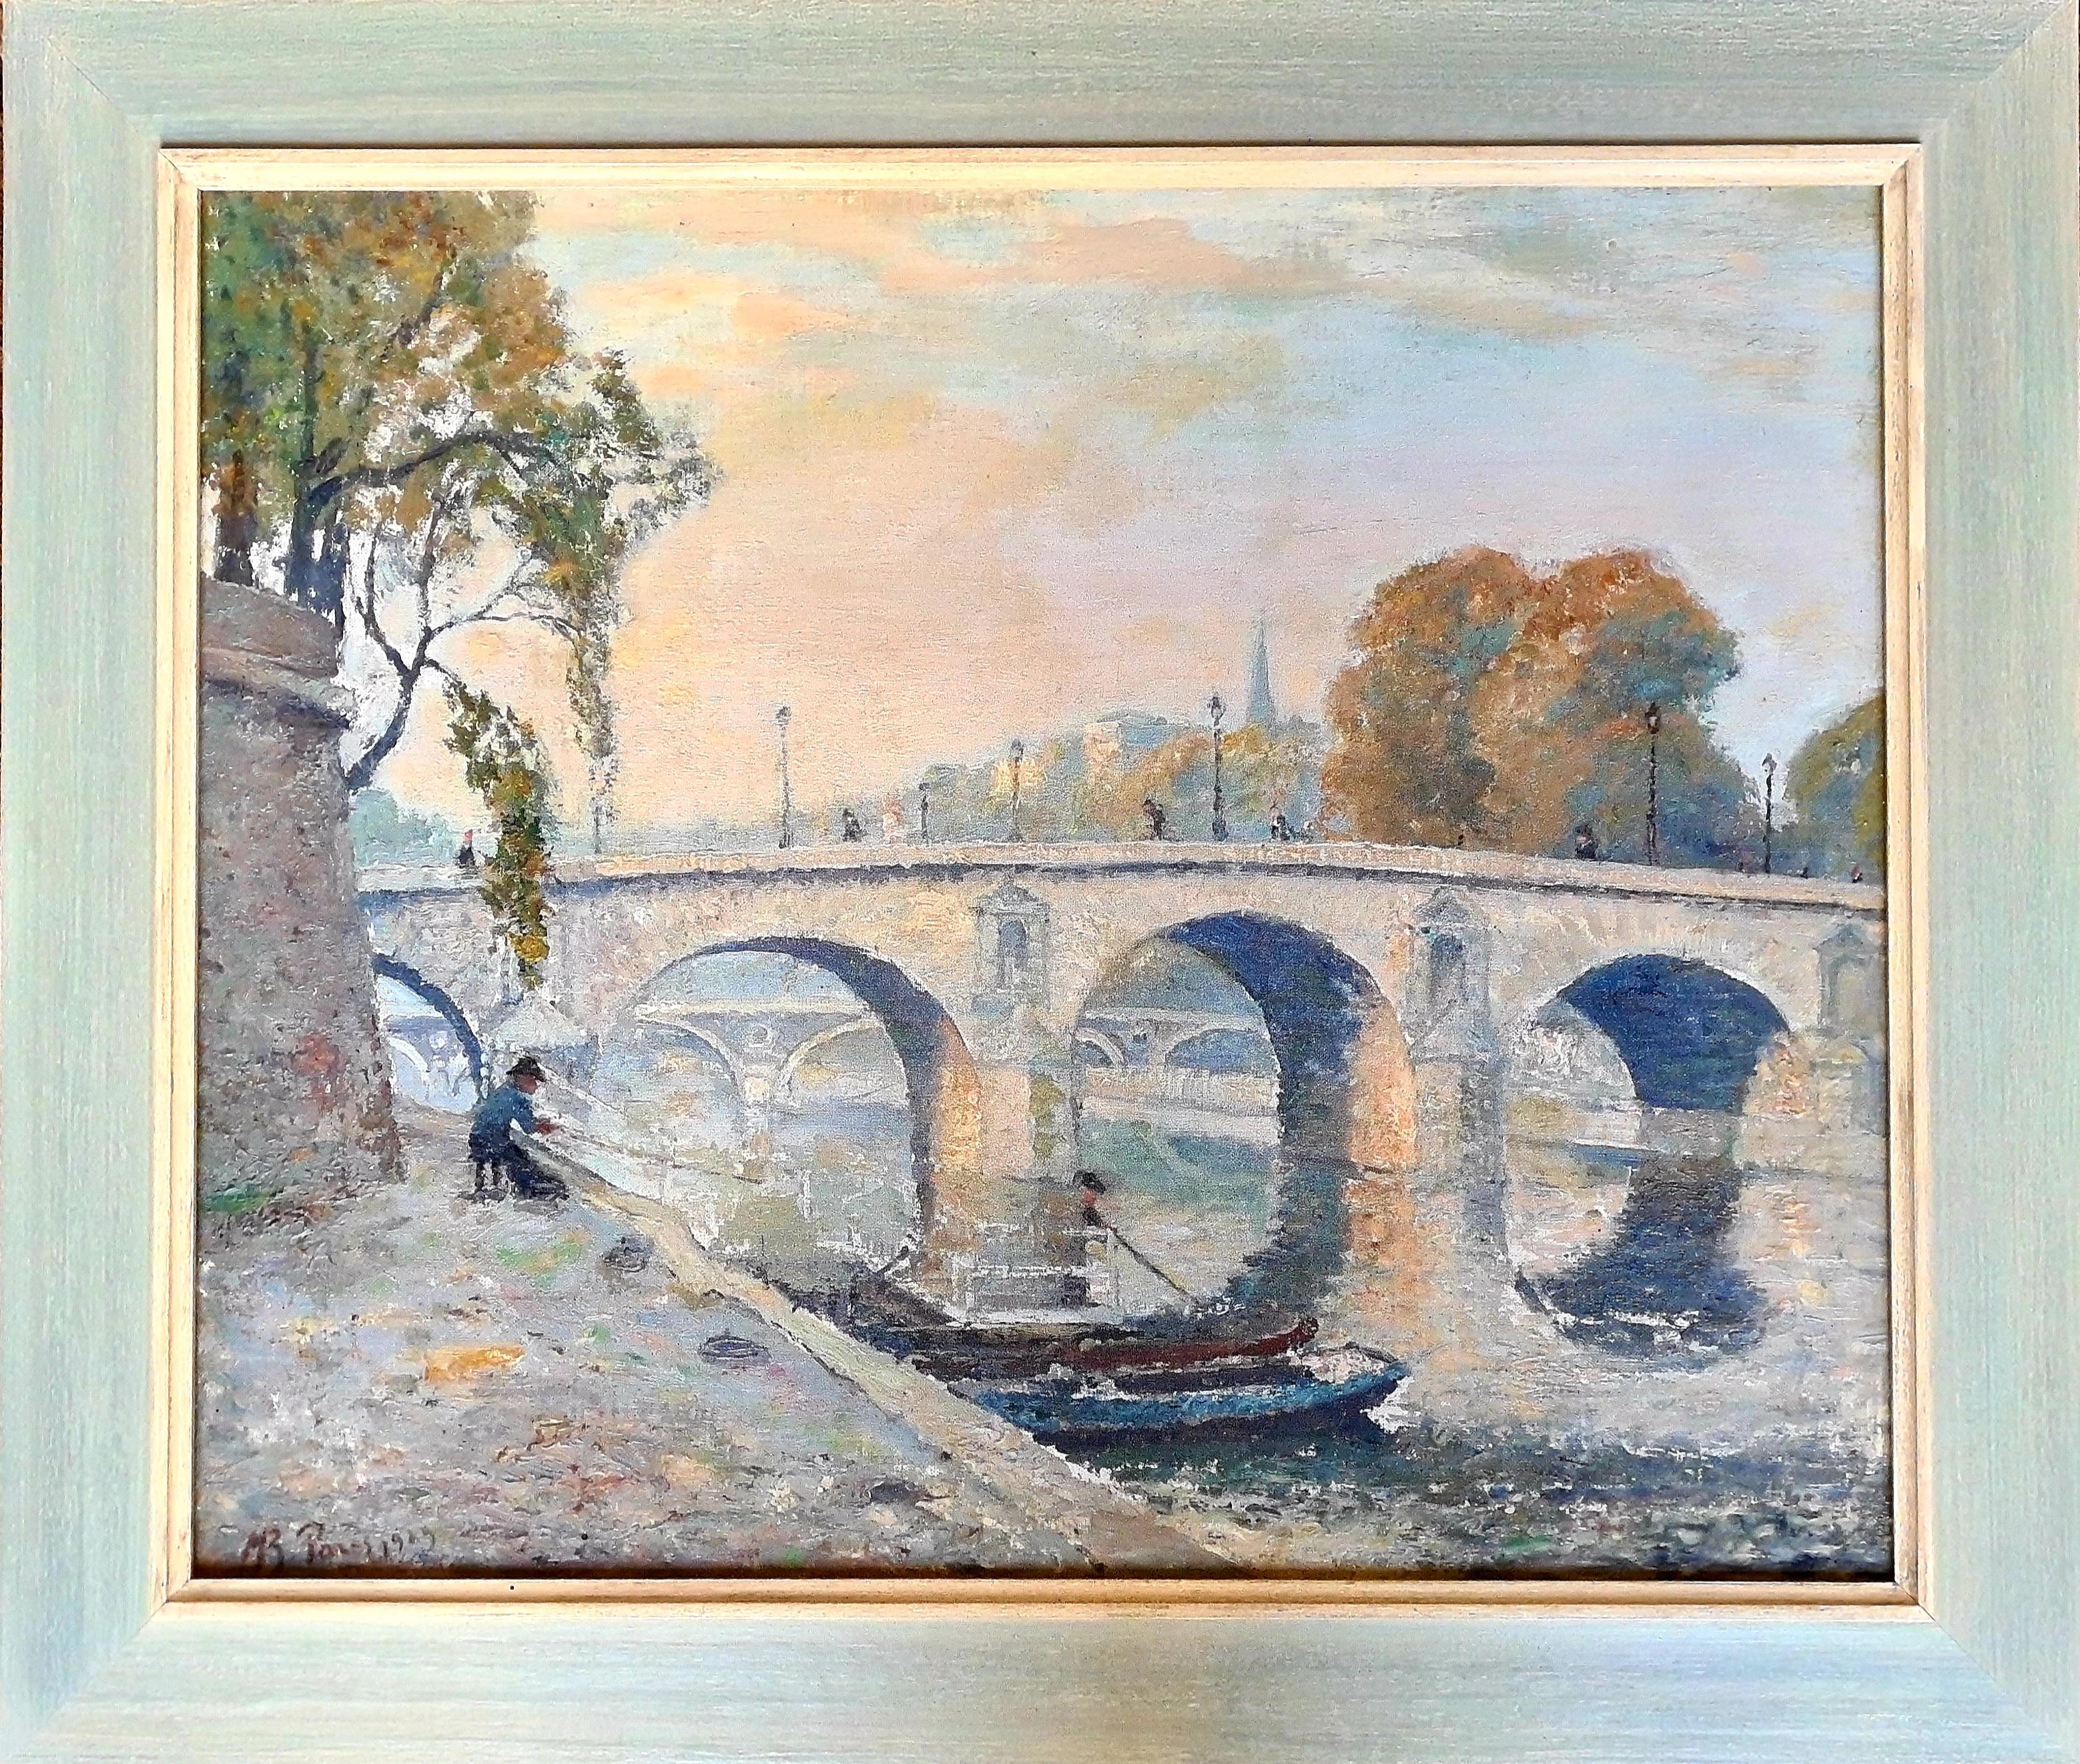 French Impressionist oil on board view of a fisherman at the riverbank of the Seine in Paris next to the Bridge St Marie, with the old spire of Notre Dame in the distance. The painting is initial signed, located and dated bottom left. Presented in a